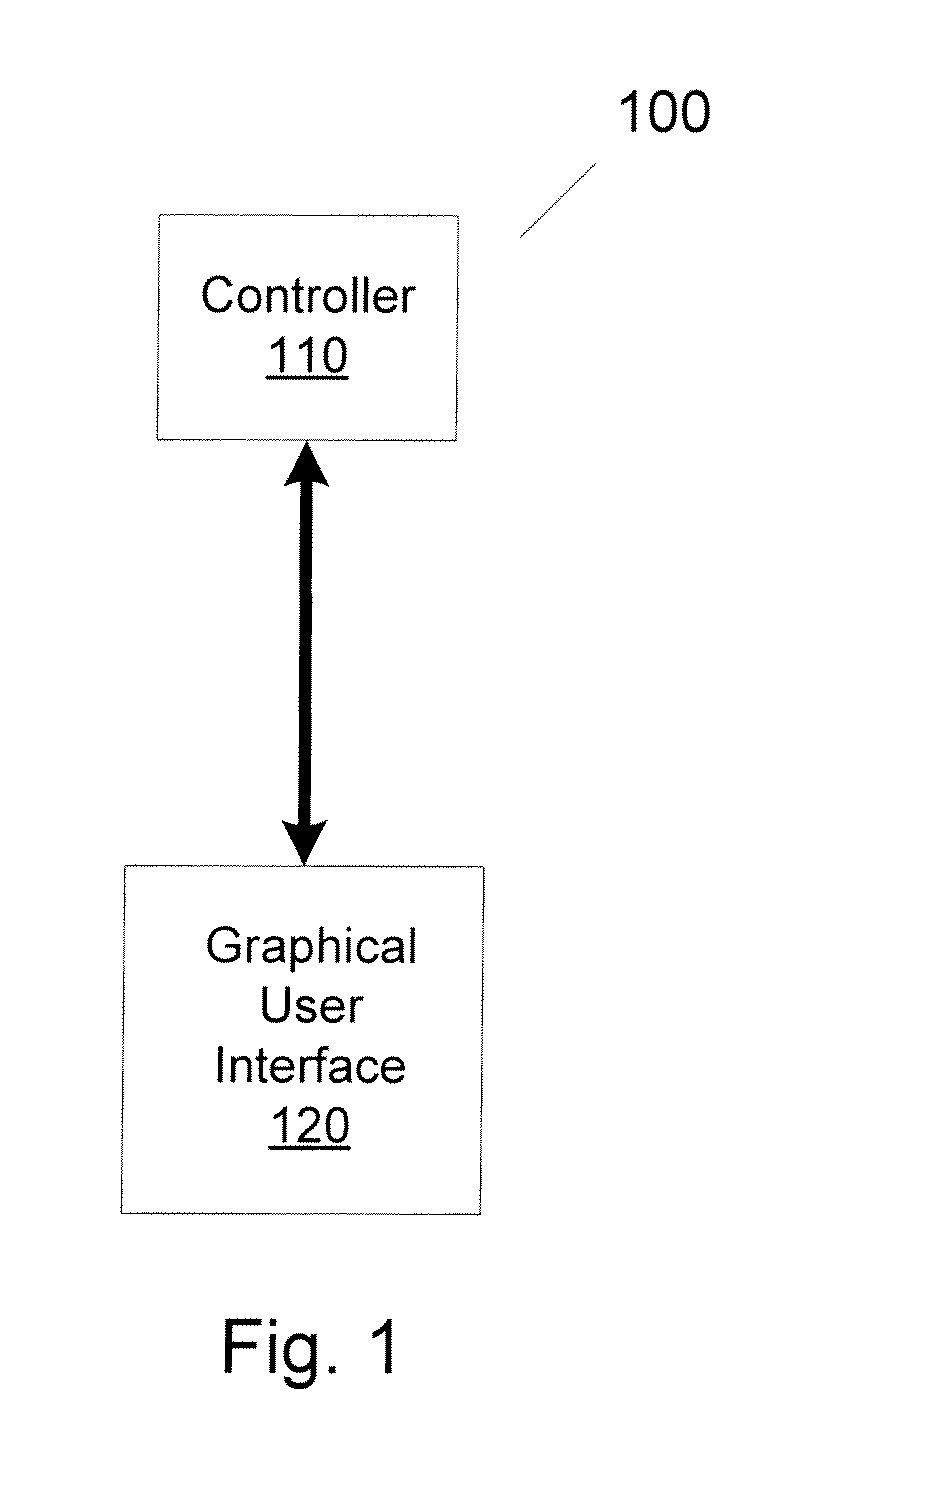 Apparatus, system and method for a web-based interactive video platform